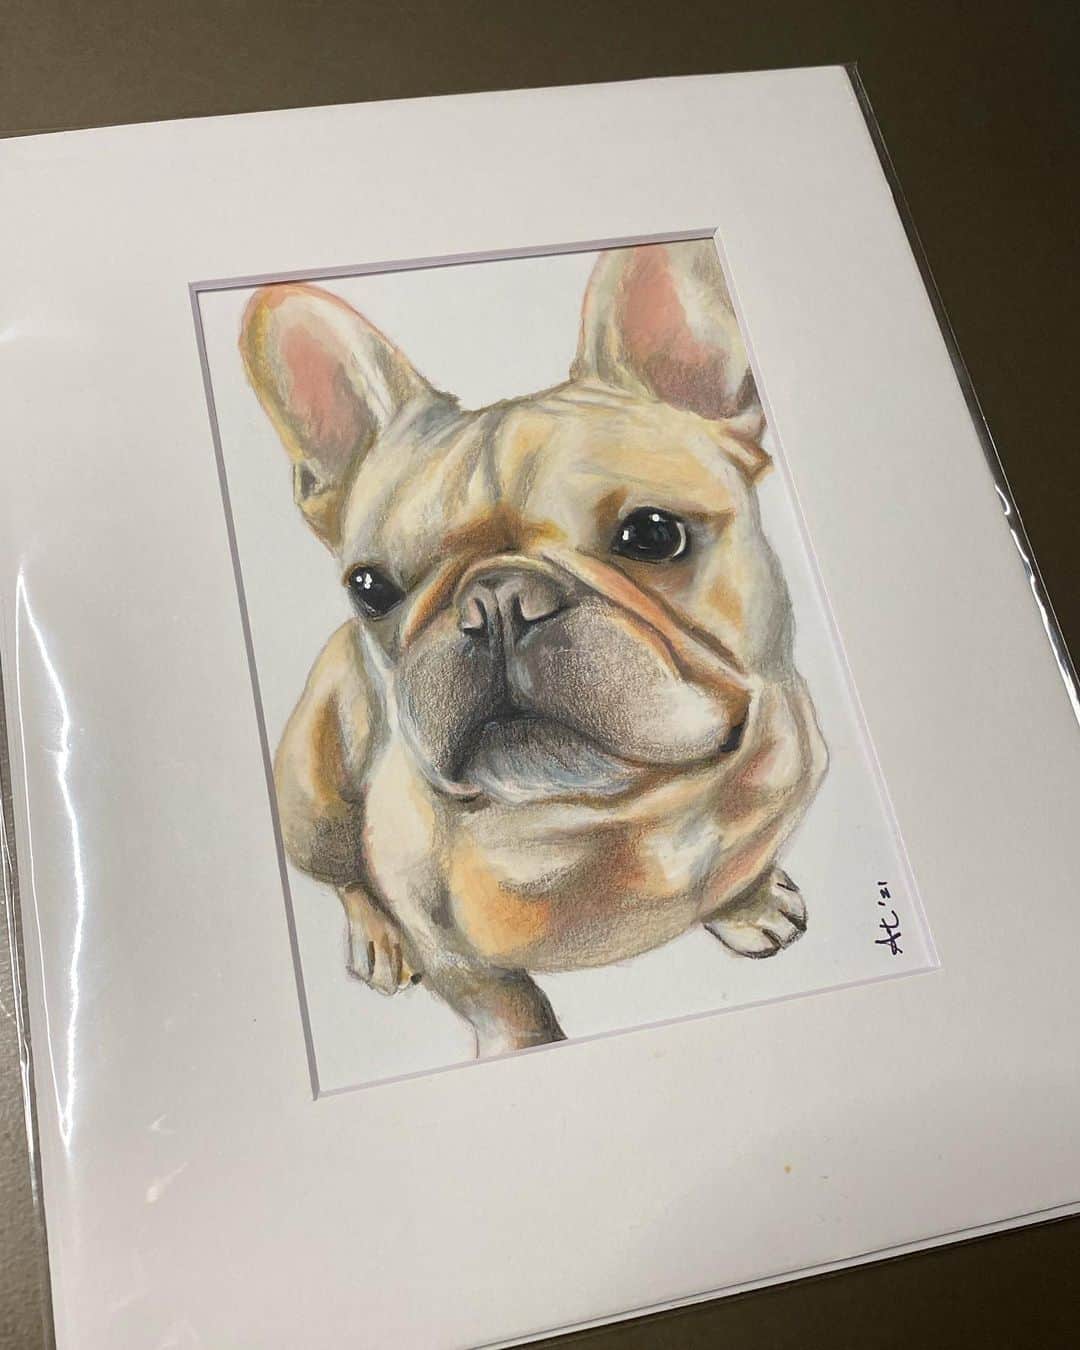 Hamlinのインスタグラム：「Check out this wonderful drawing that @angelatdesigns created for Hamlin! It’s so amazingly amazing and awesome. My jowls look so lifelike that you can practically see the lint balls, crumbs, and unearthed Micro Machines found under couch cushions tucked away in my whisker flaps. Thanks for the amazing art piece!!! ❤️  Check out @angelatdesigns to find out more about how you can get your own custom drawing of your furbaby!」